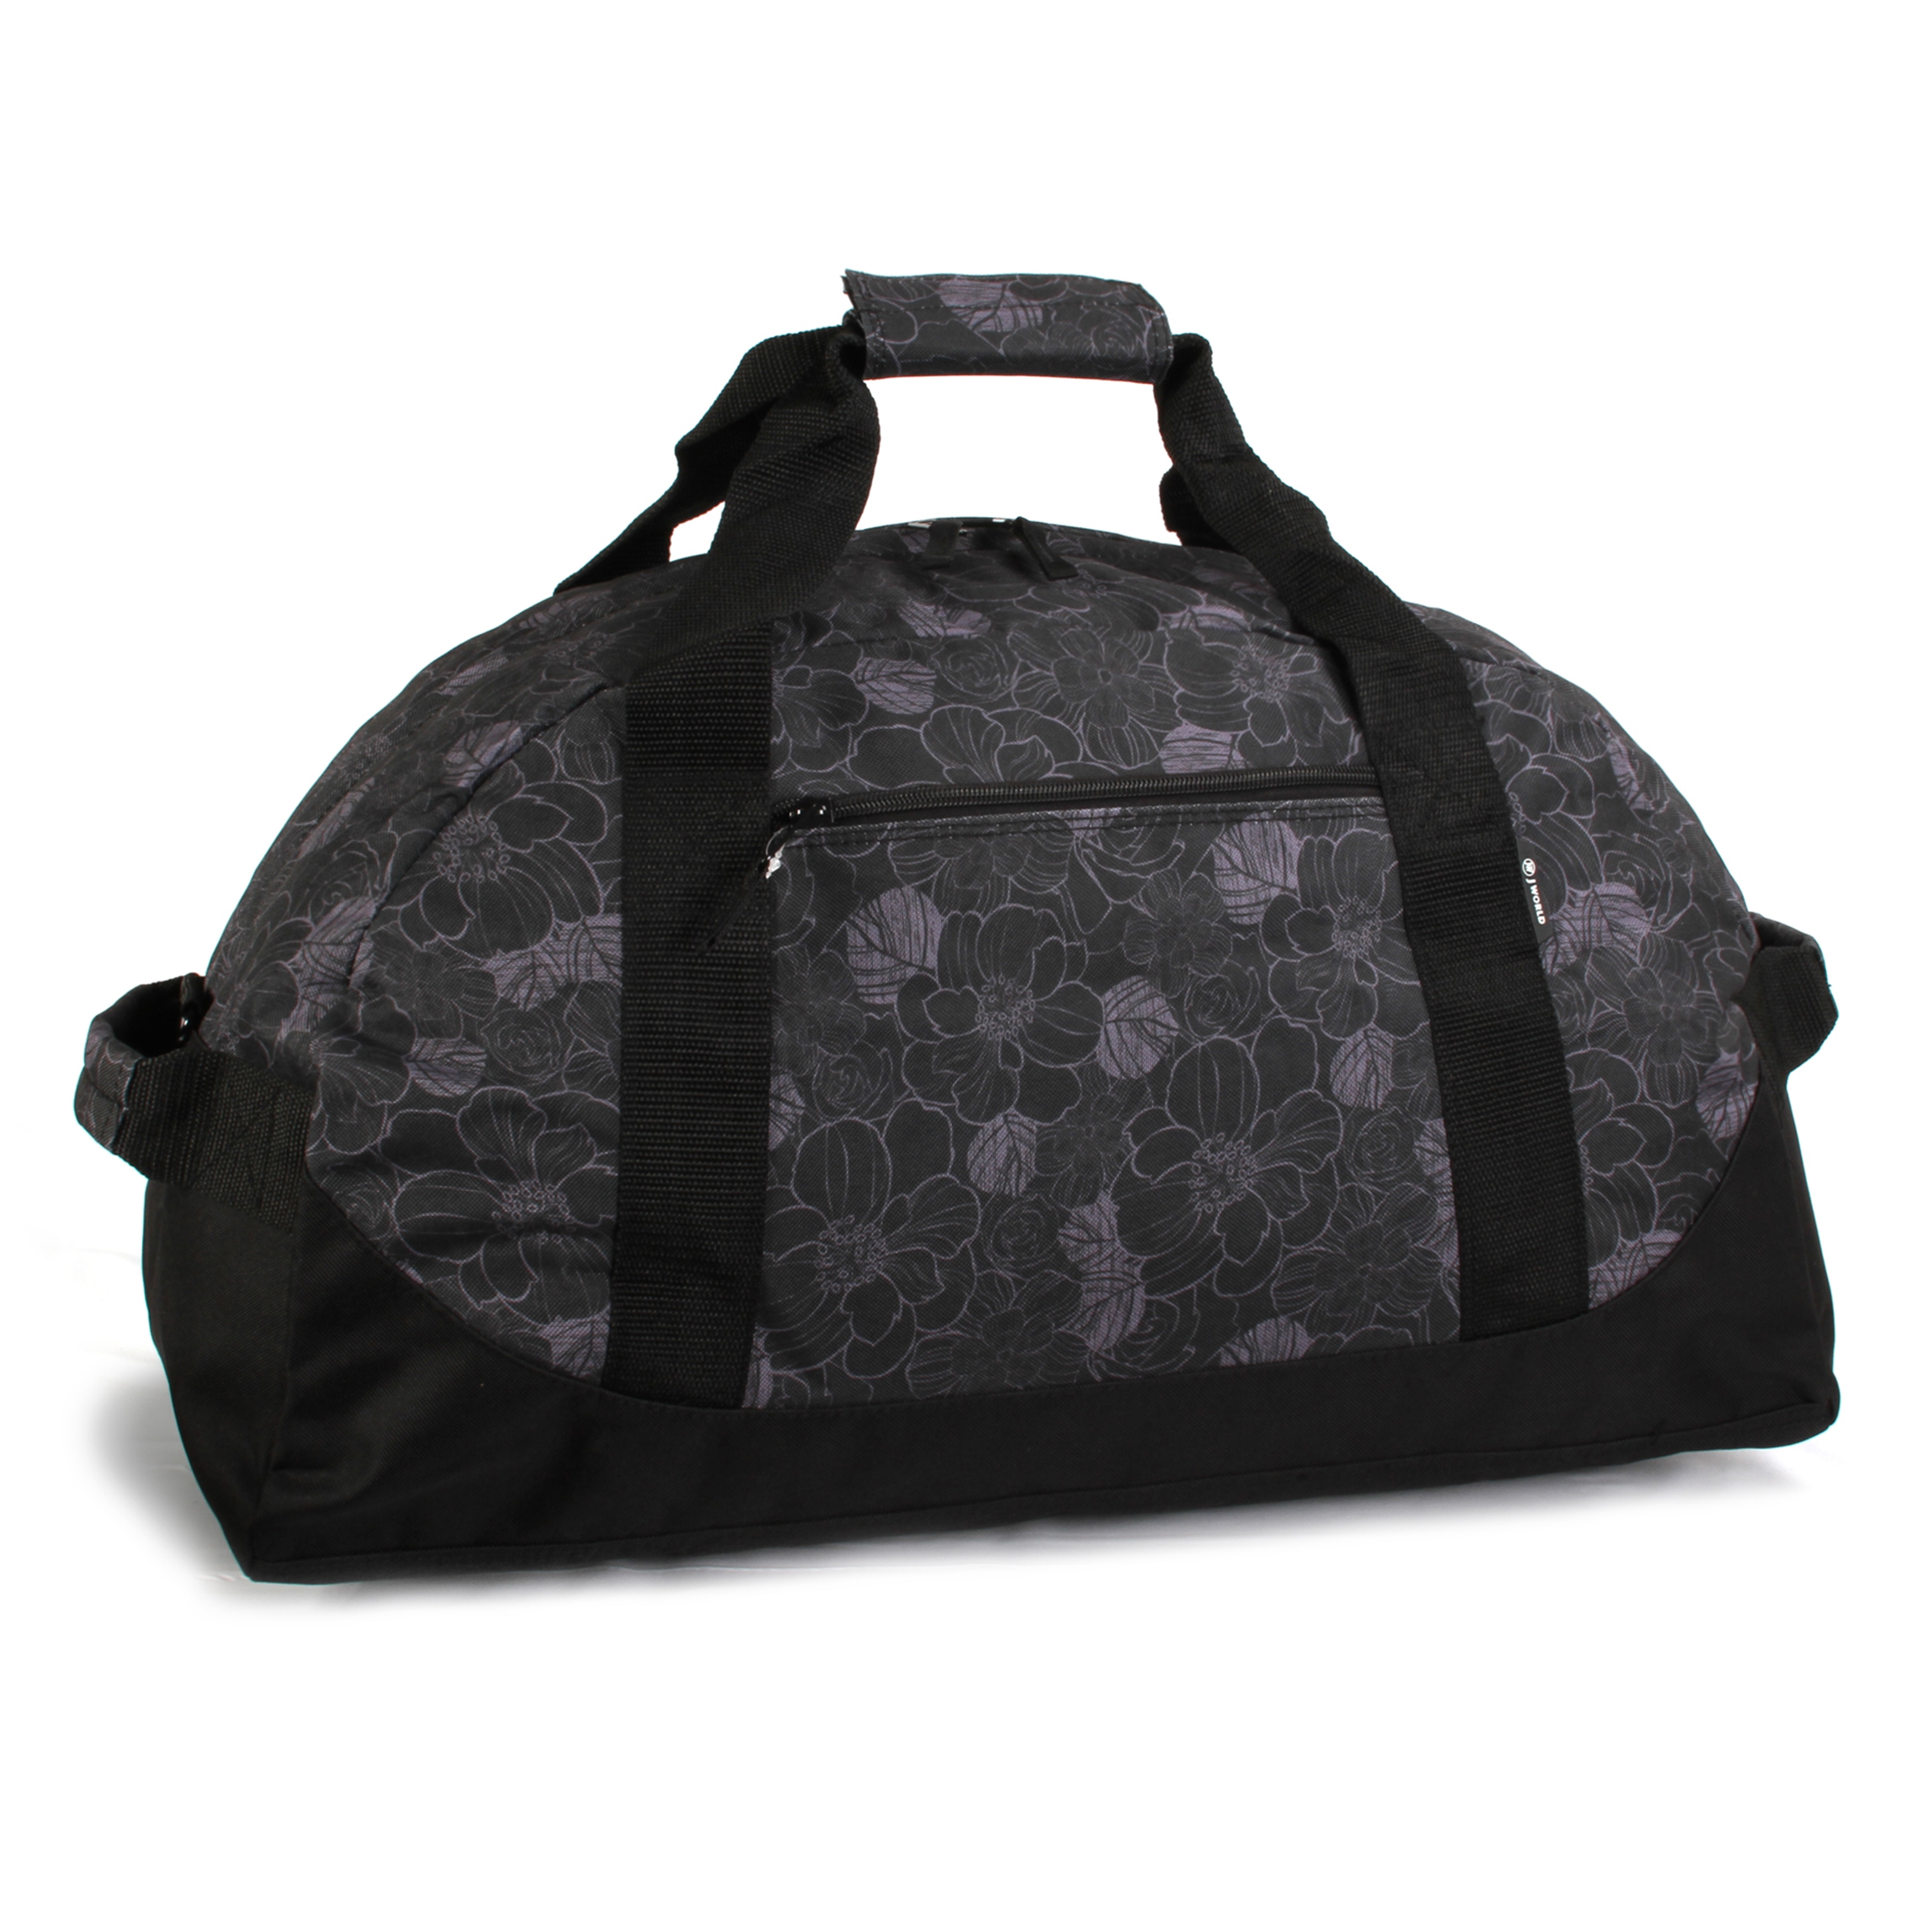 24" Lawrence Travel Duffel Color: Hawaii - image 2 of 2